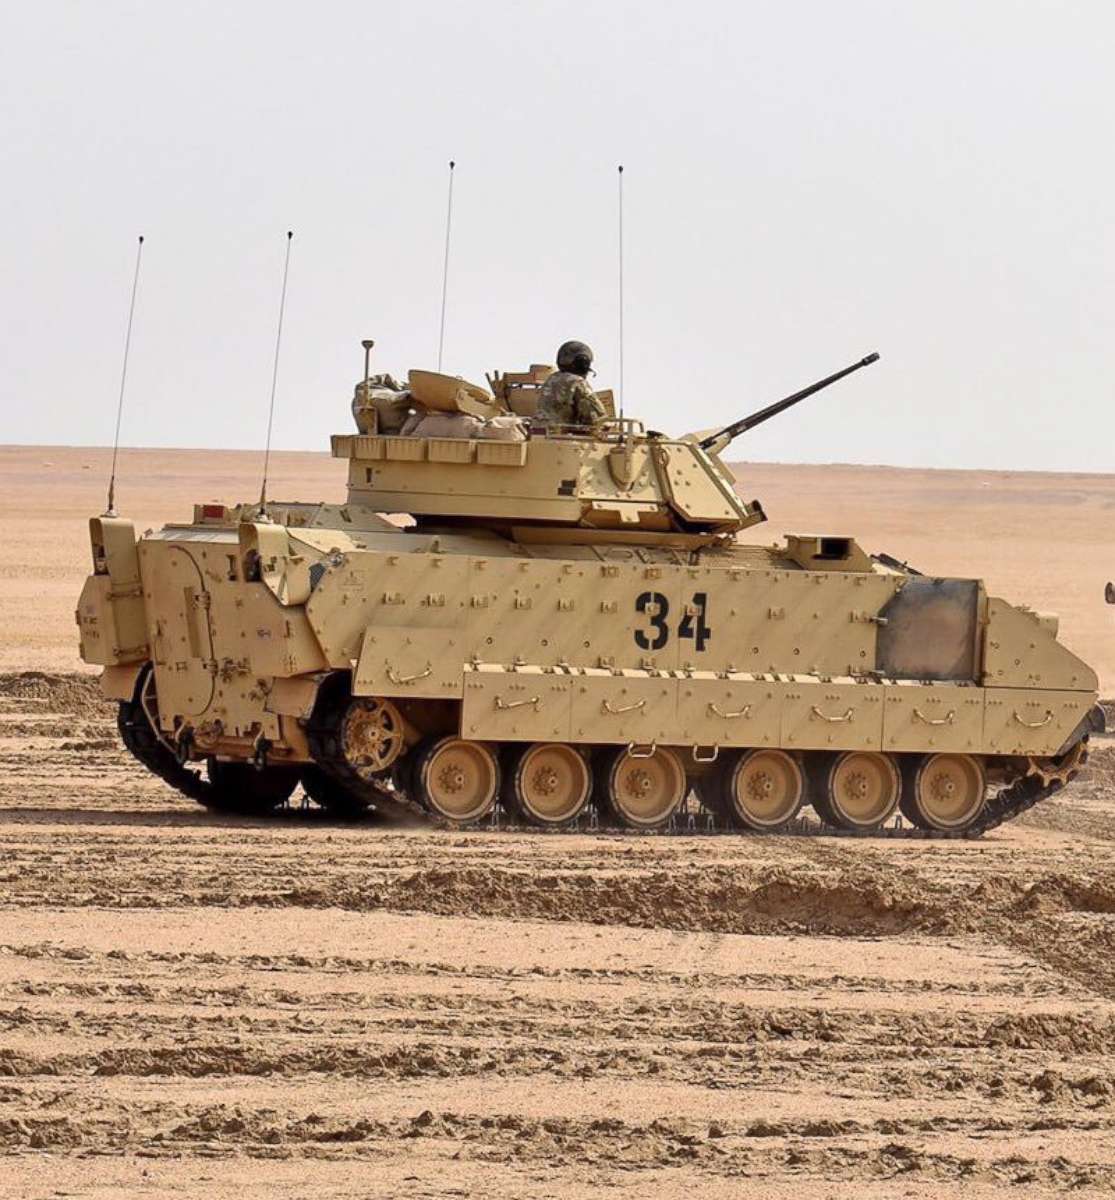 PHOTO: U.S. soldiers load M2A2 Bradley Fighting Vehicles headed to Deir ez Zor, Syria as part of a new U.S. troop deployment to defend the oil fields in that region.